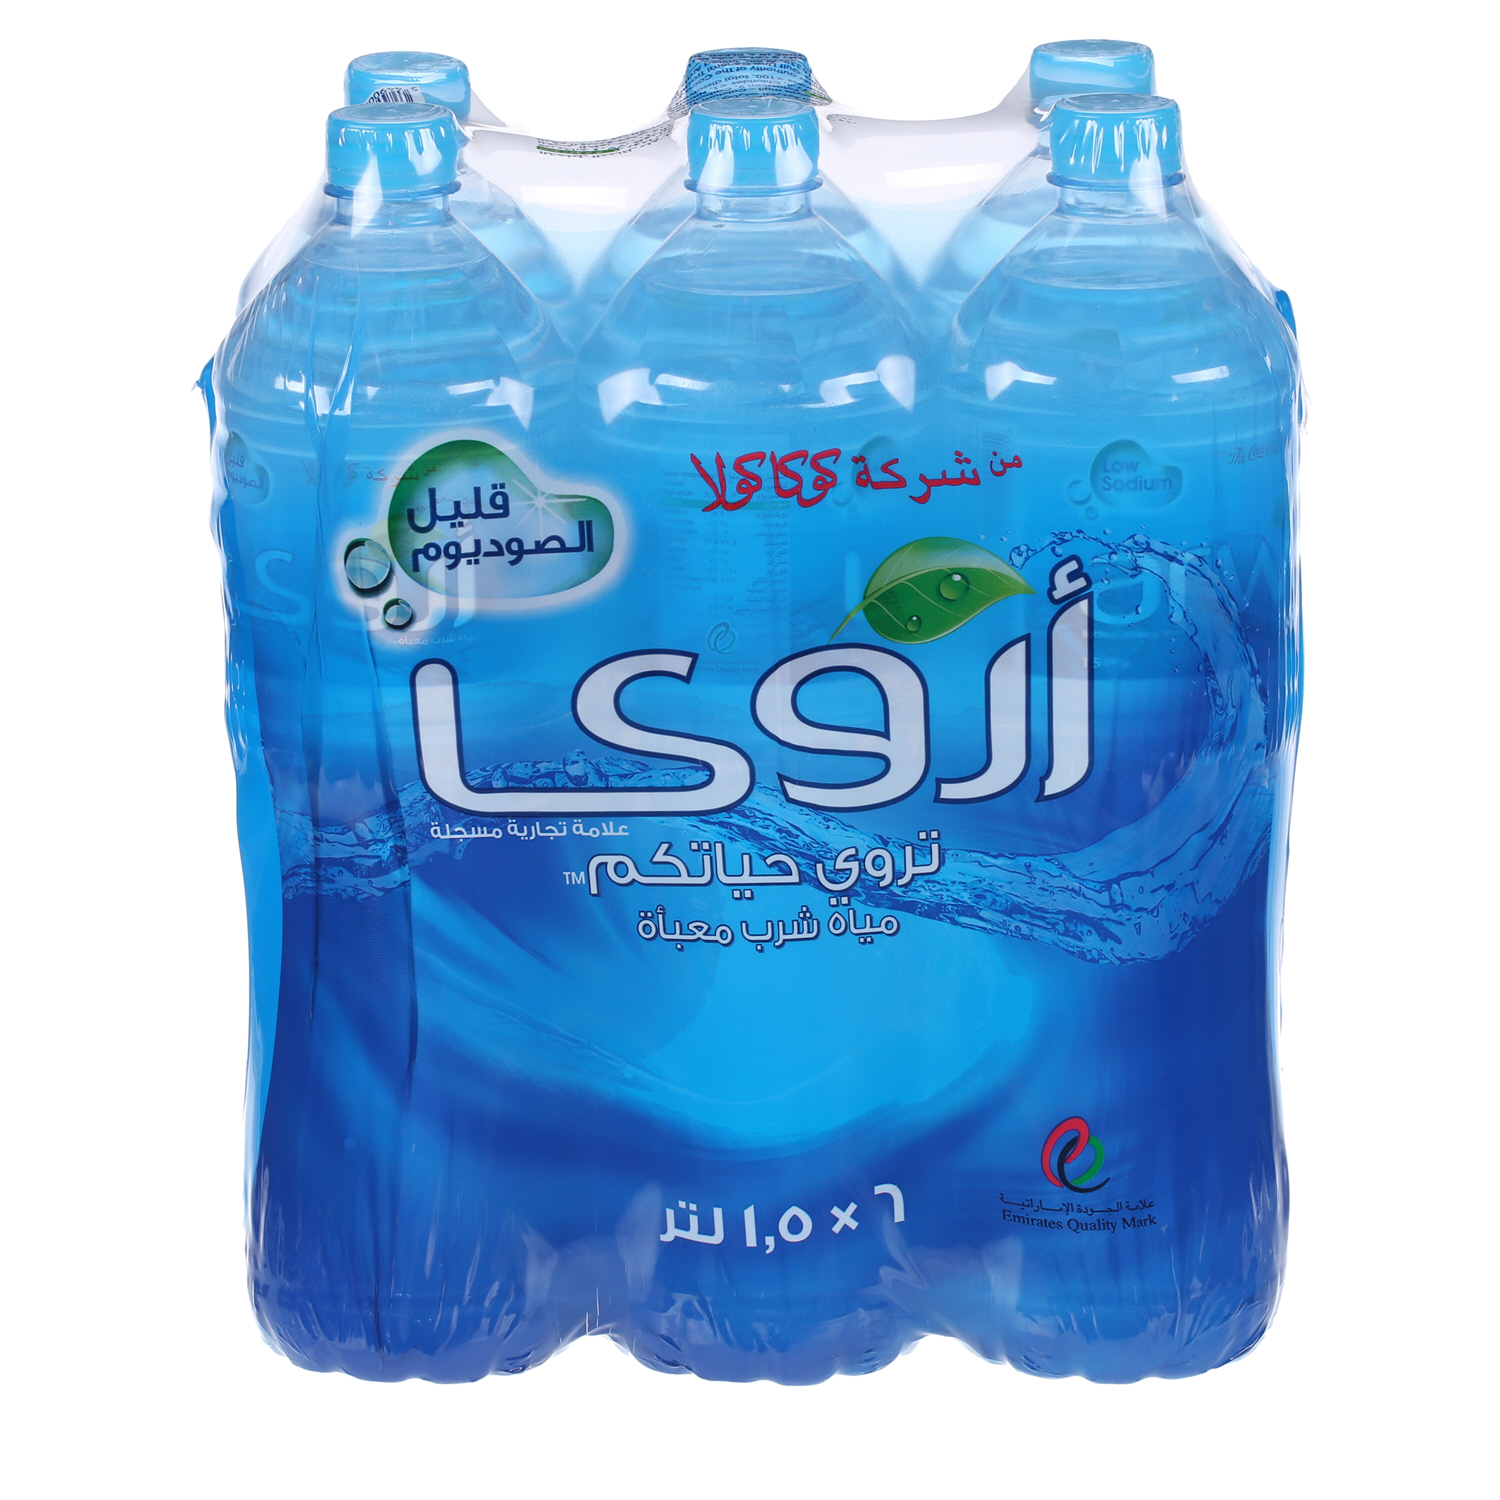 Arwa Mineral Water 1.5 L × 6 Pack